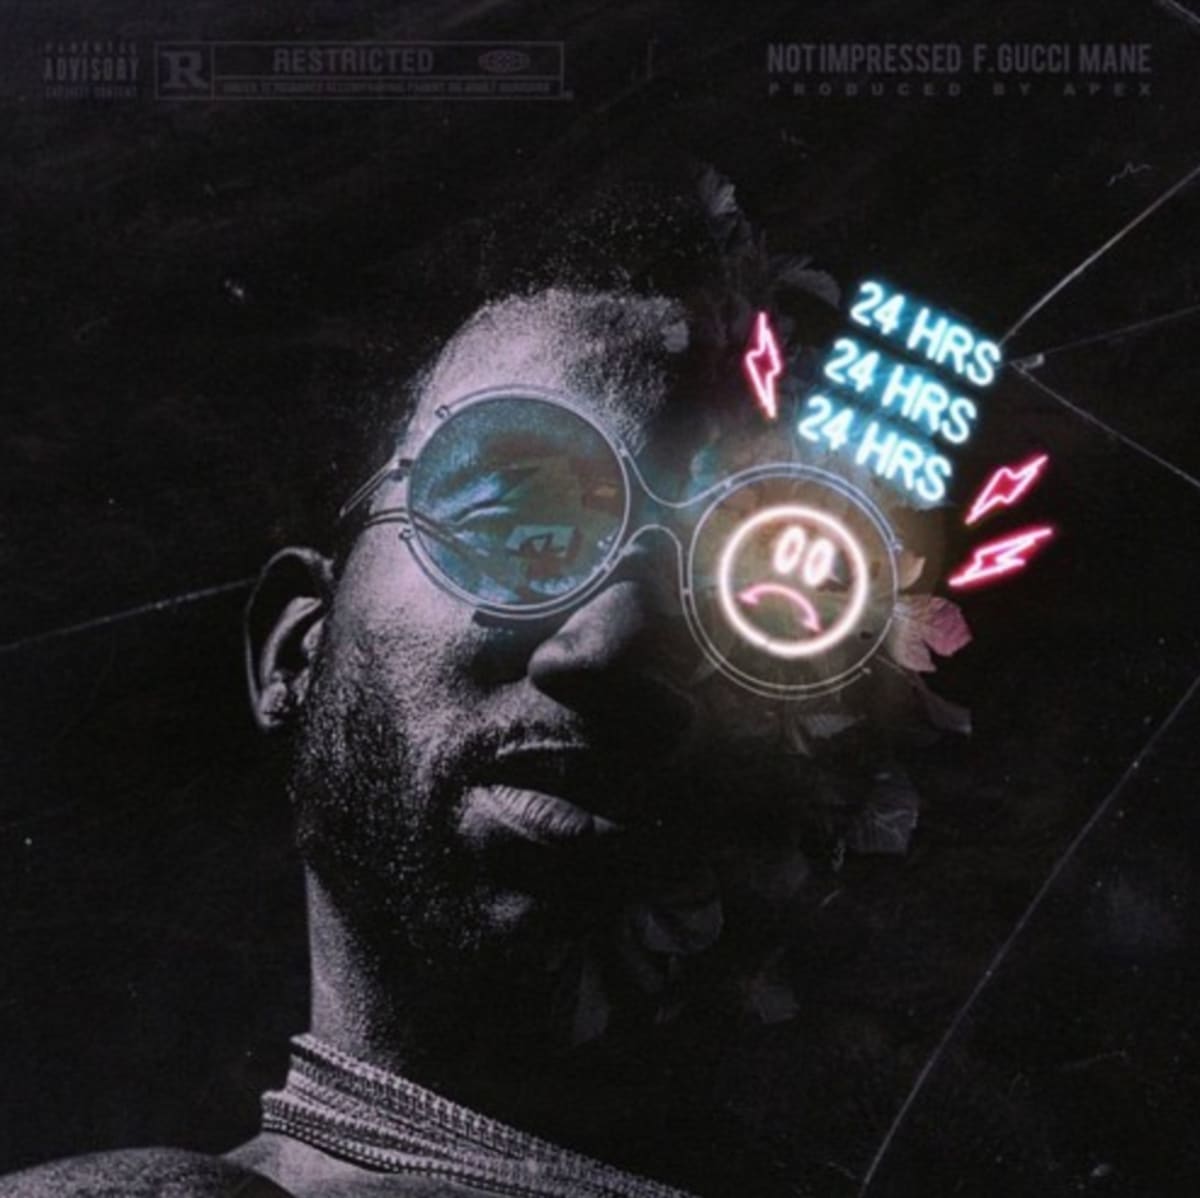 Listen to 24hrs and Gucci Mane Connect on 1200 x 1198